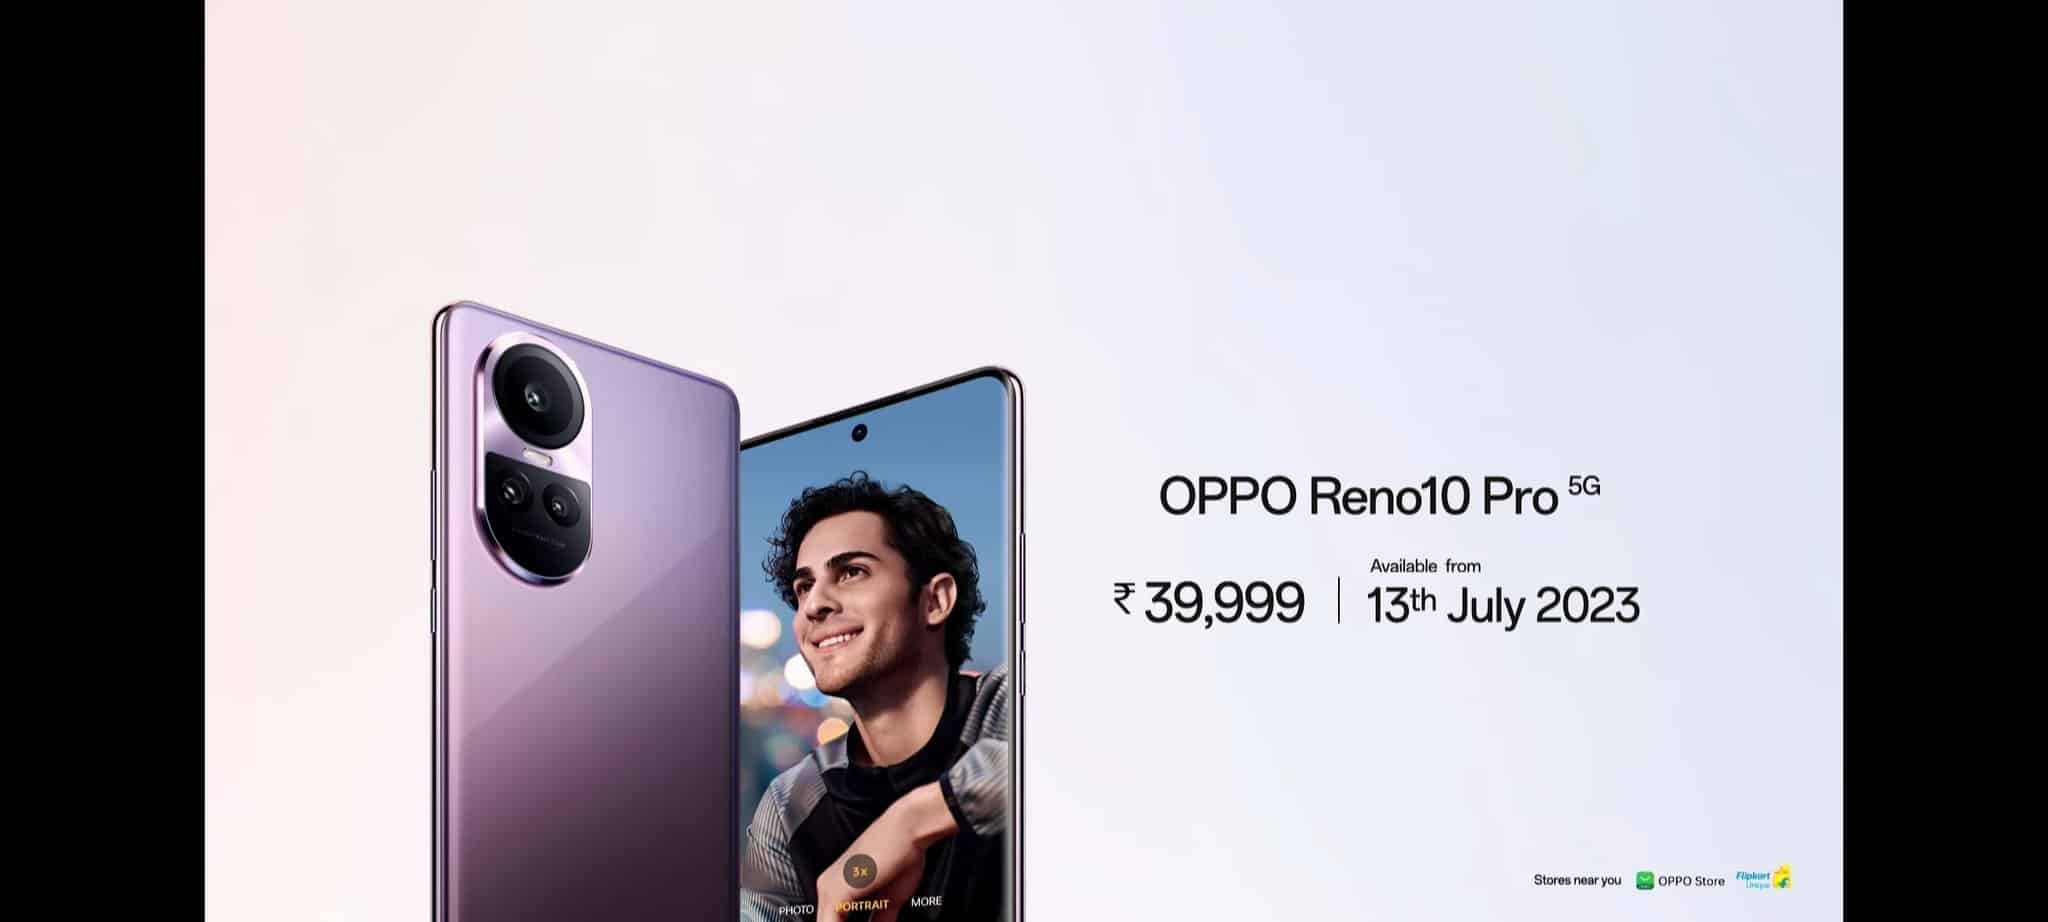 Oppo Reno 10 Pro, Reno 10 Pro+ India launch On July 10: How To